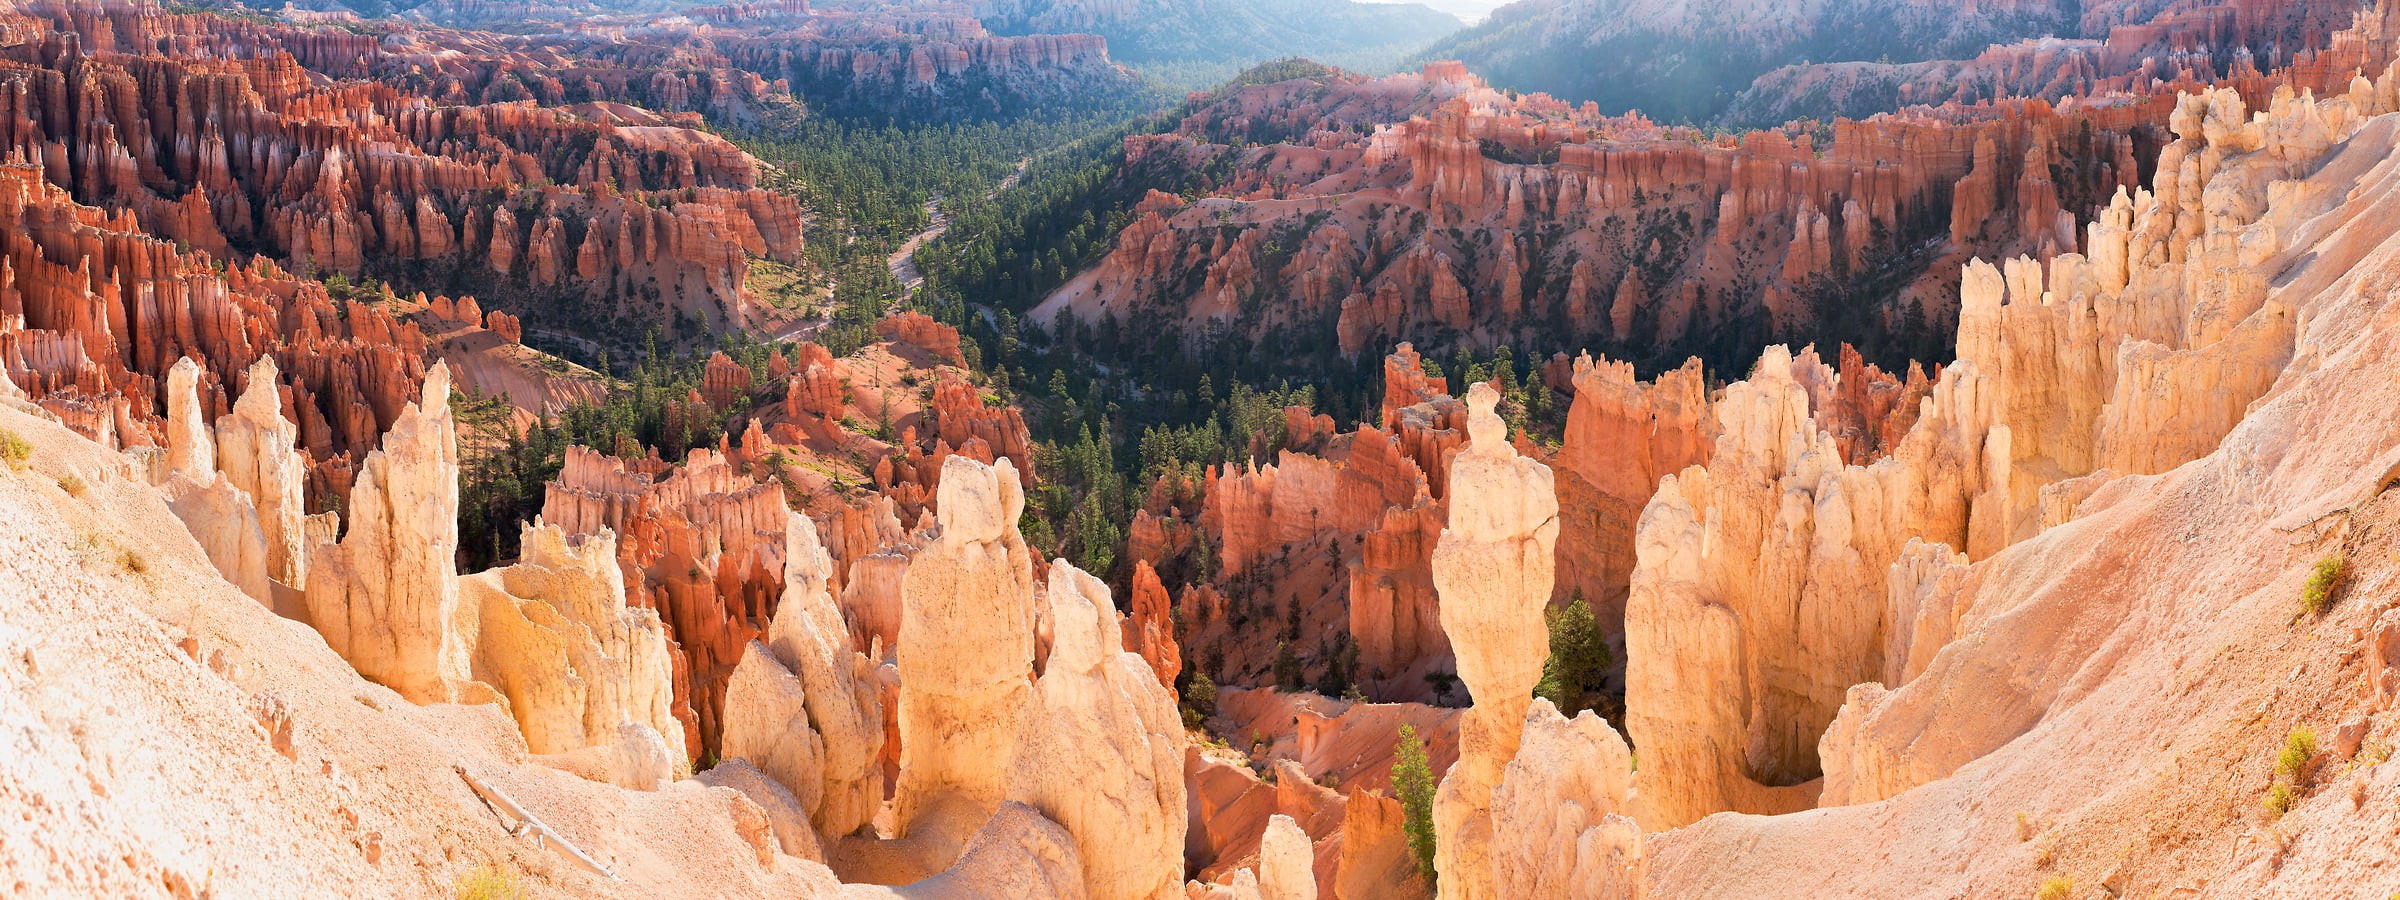 435 megapixels! A very high resolution, large-format VAST photo of an American landscape with natural formations; geological photograph created by Jim Tarpo in Bryce Canyon National Park, Utah.